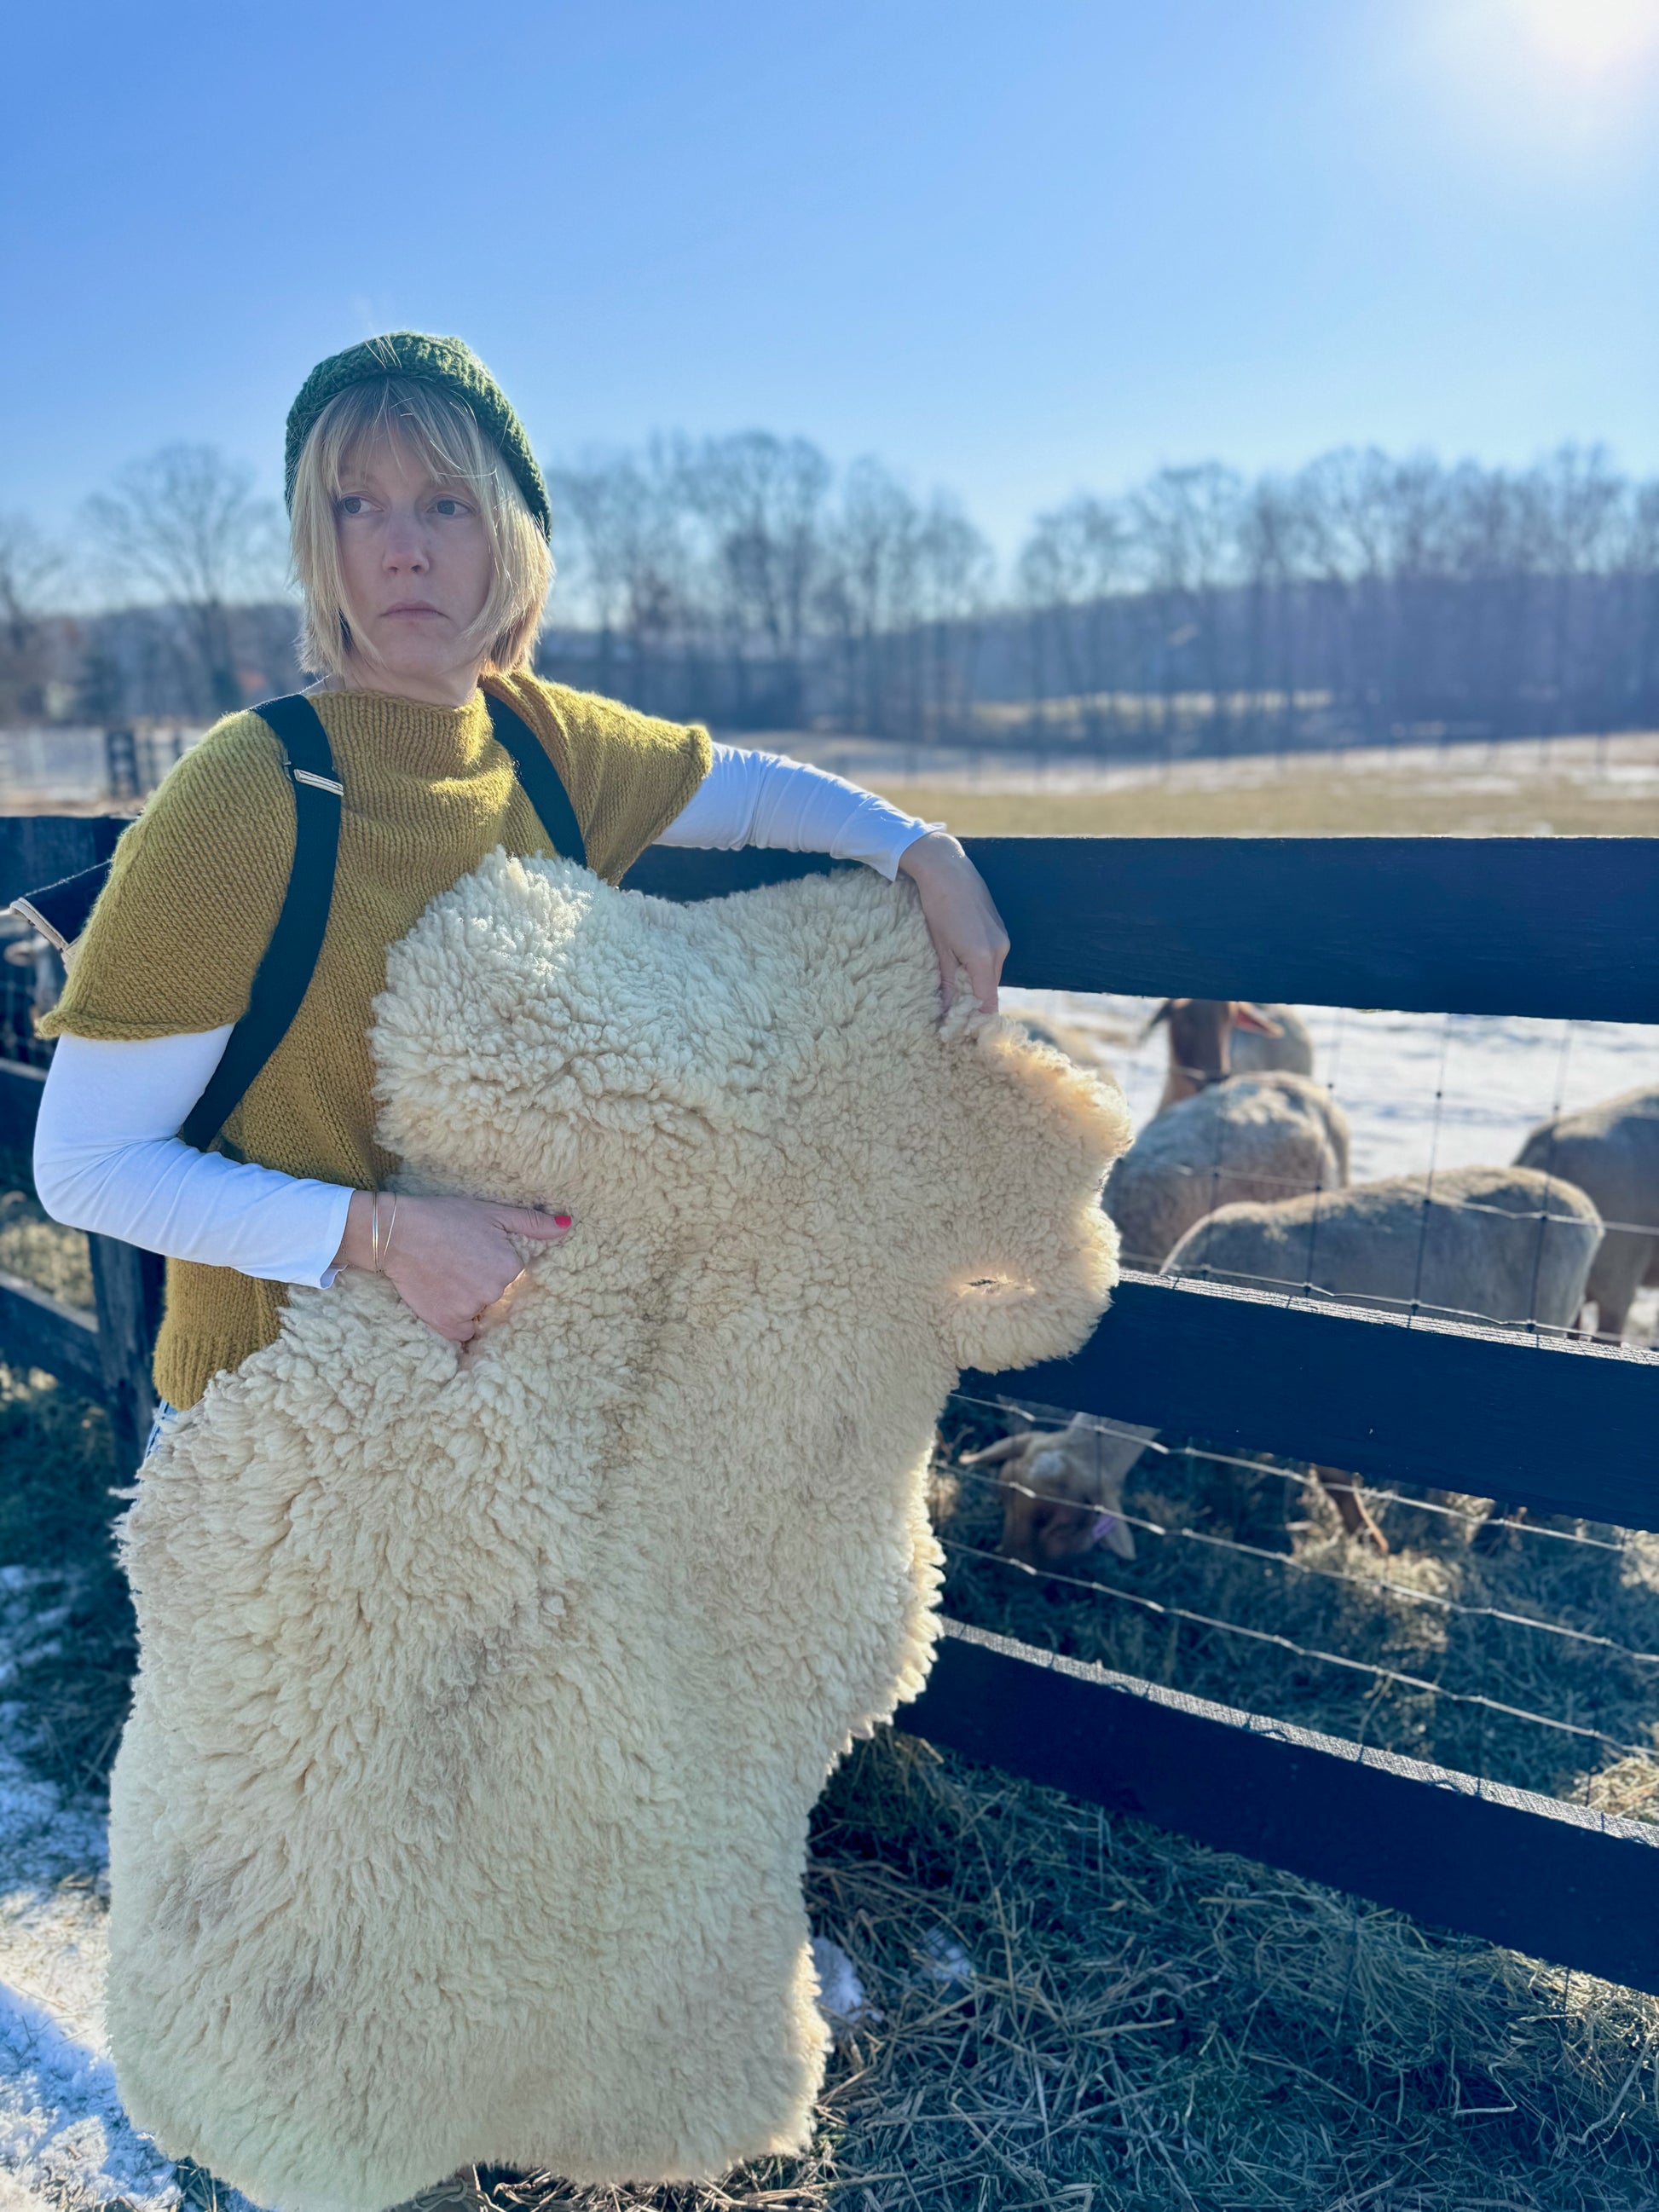 Sherry - a white female shepherd holds a Tunis pelt in the cold winter sunshine just outside the sheep pasture